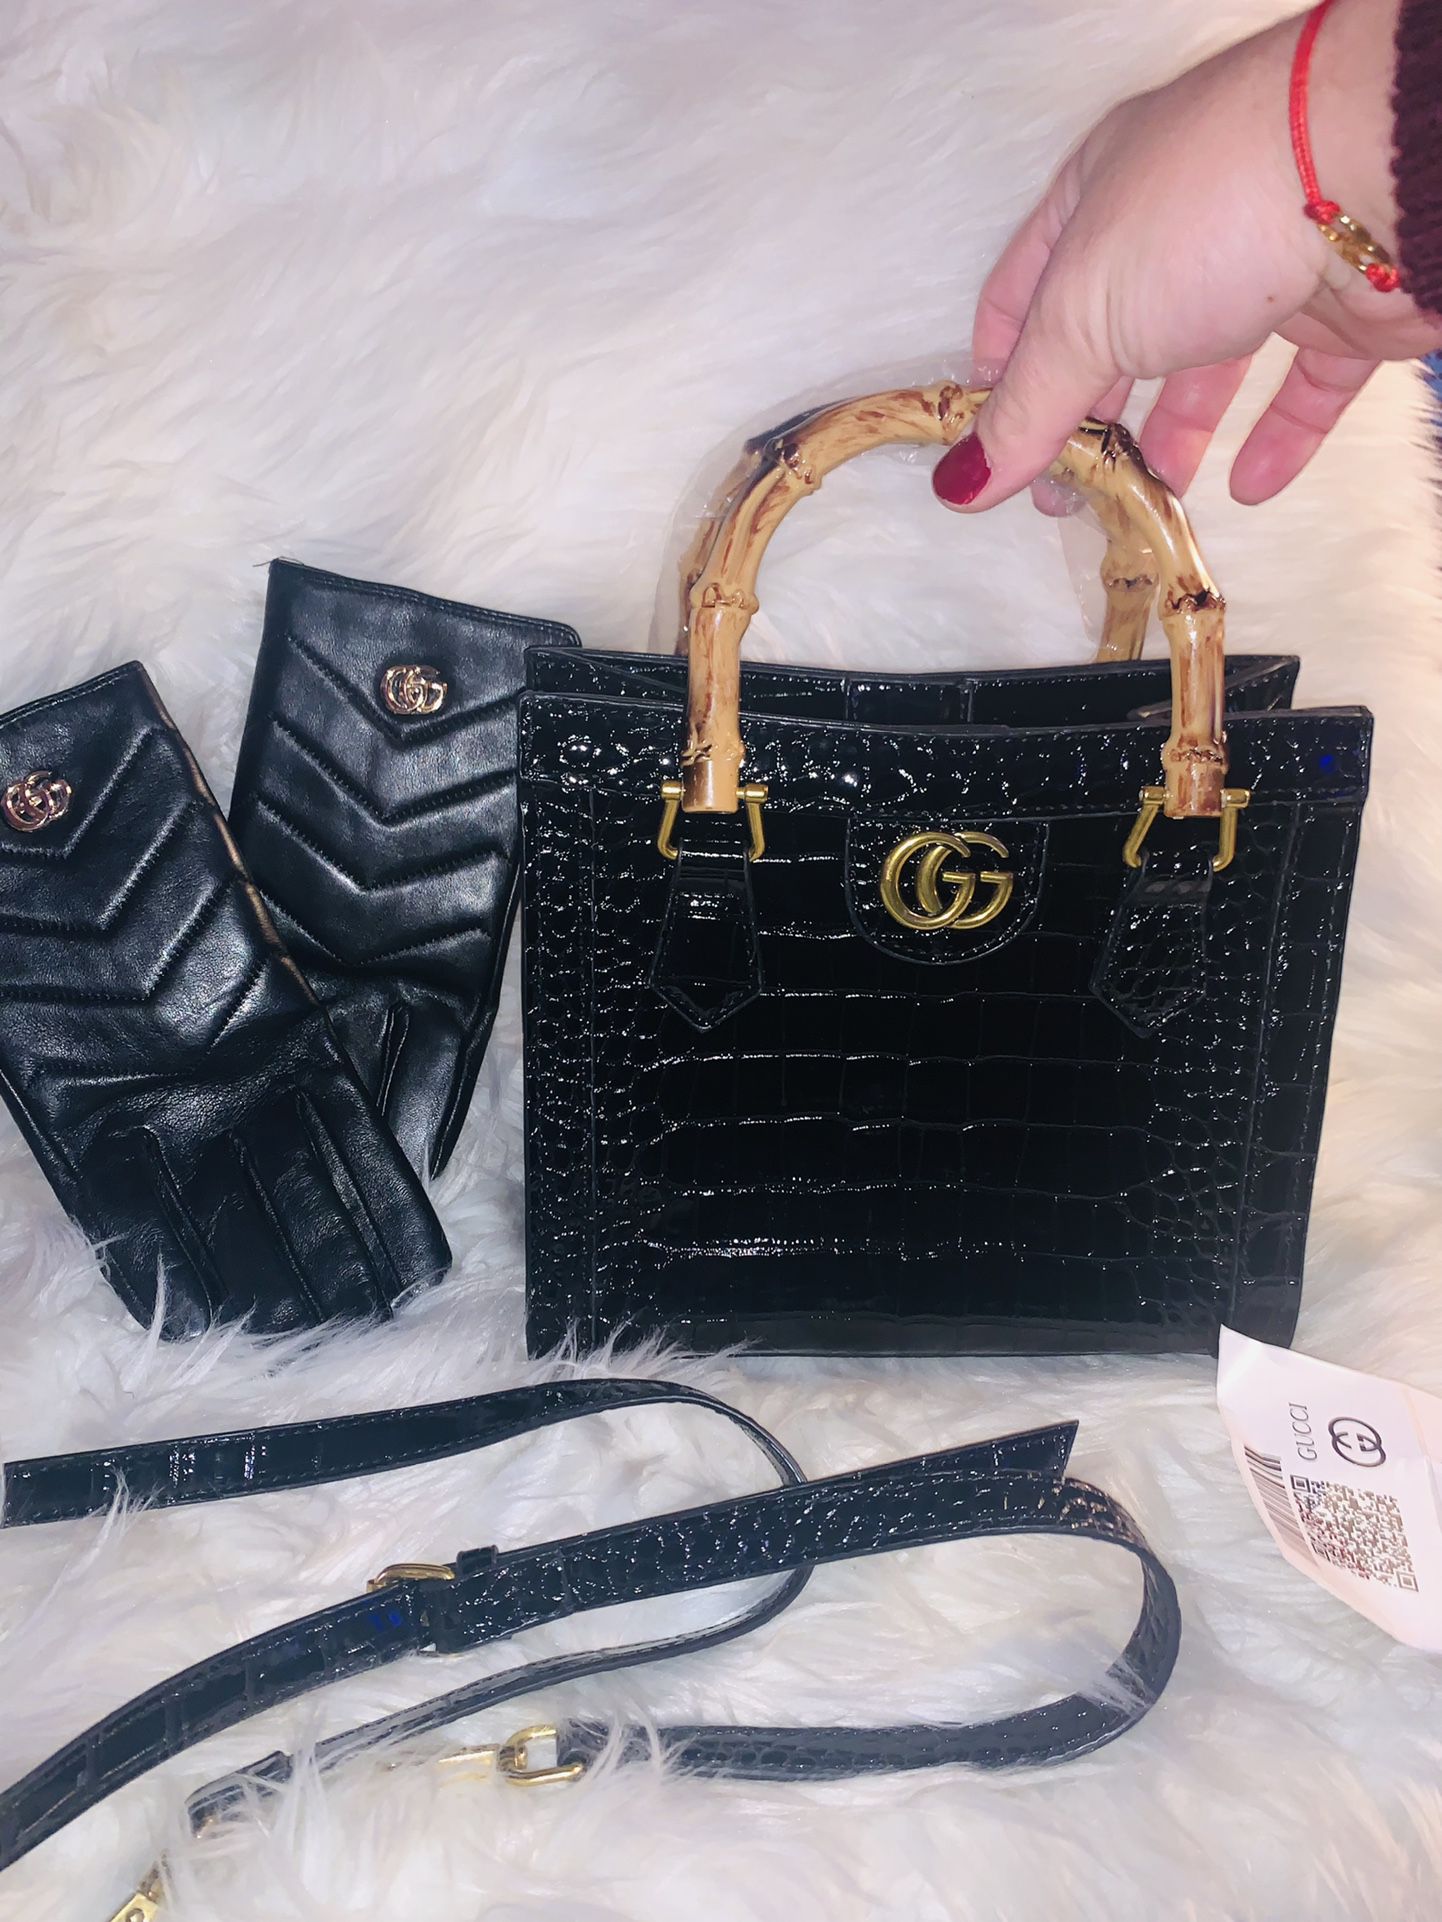 🔥 Combo set GG Leather Gloves Also Lady G Purse 🔥 